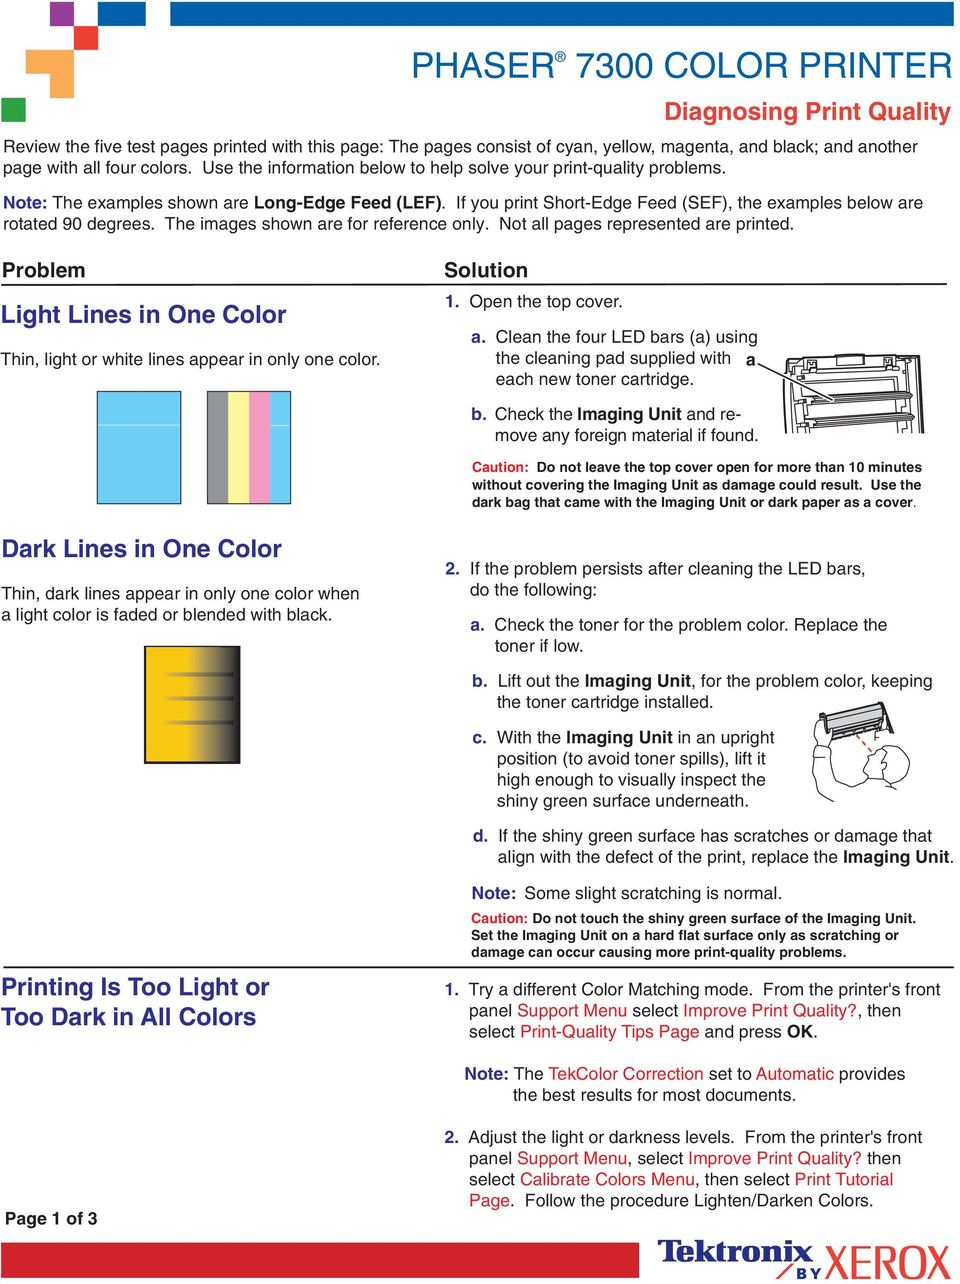 The images shown are for reference only. Not all pages represented are printed. Problem Light Lines in One Color Thin, light or white lines appear in only one color. Solution 1. Open the top cover. a. Clean the four LED bars (a) using the cleaning pad supplied with a each new toner cartridge.